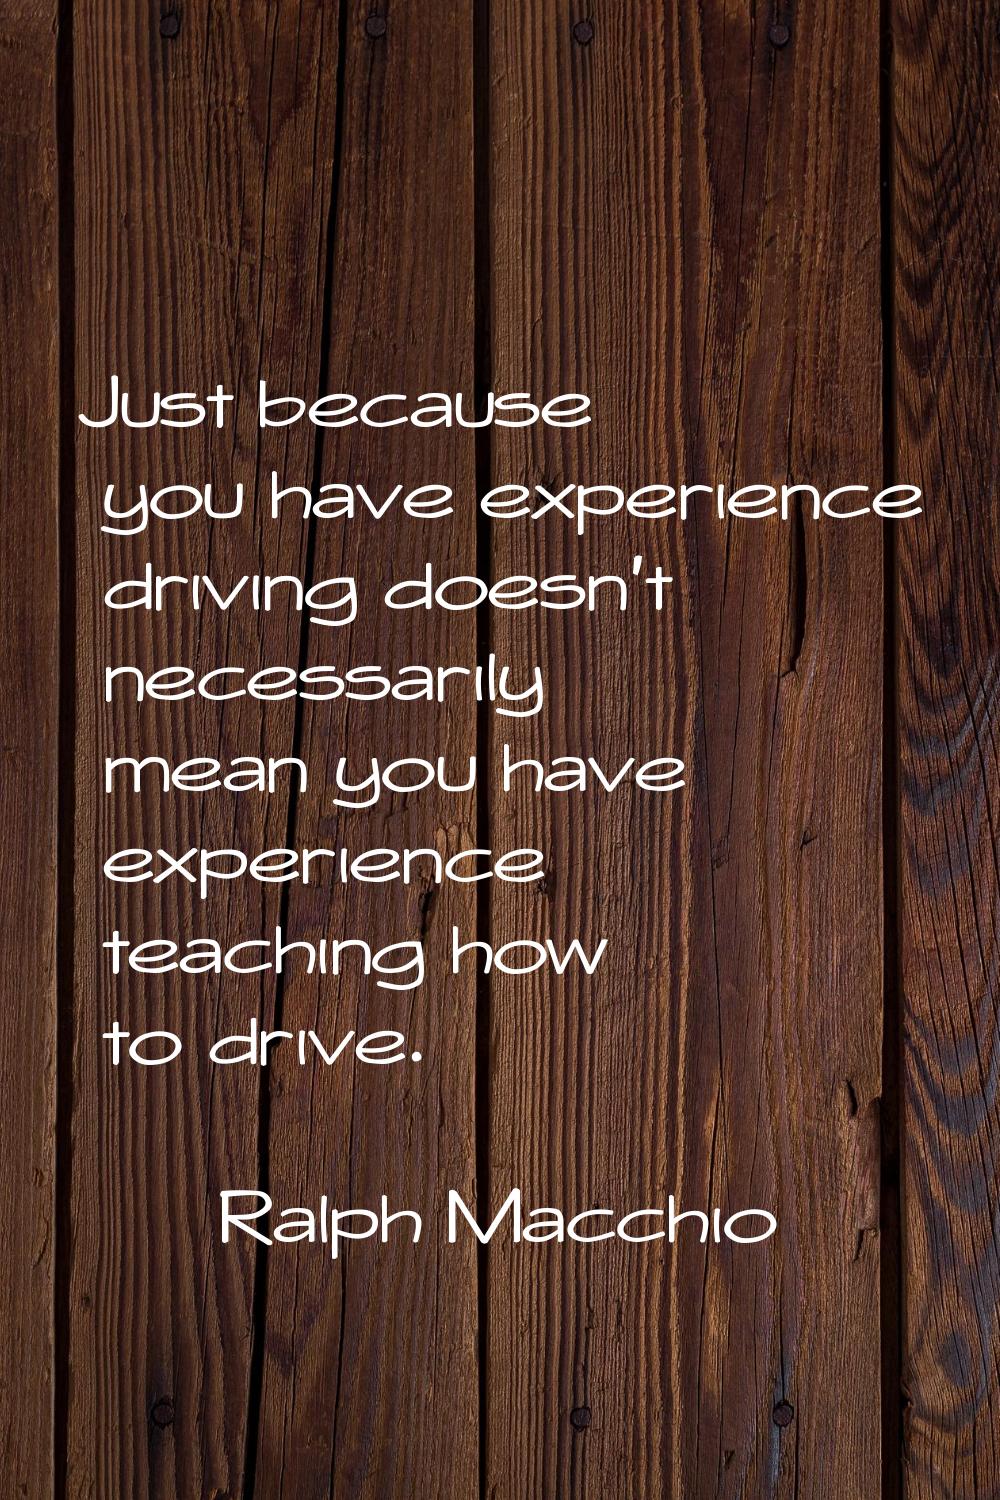 Just because you have experience driving doesn't necessarily mean you have experience teaching how 